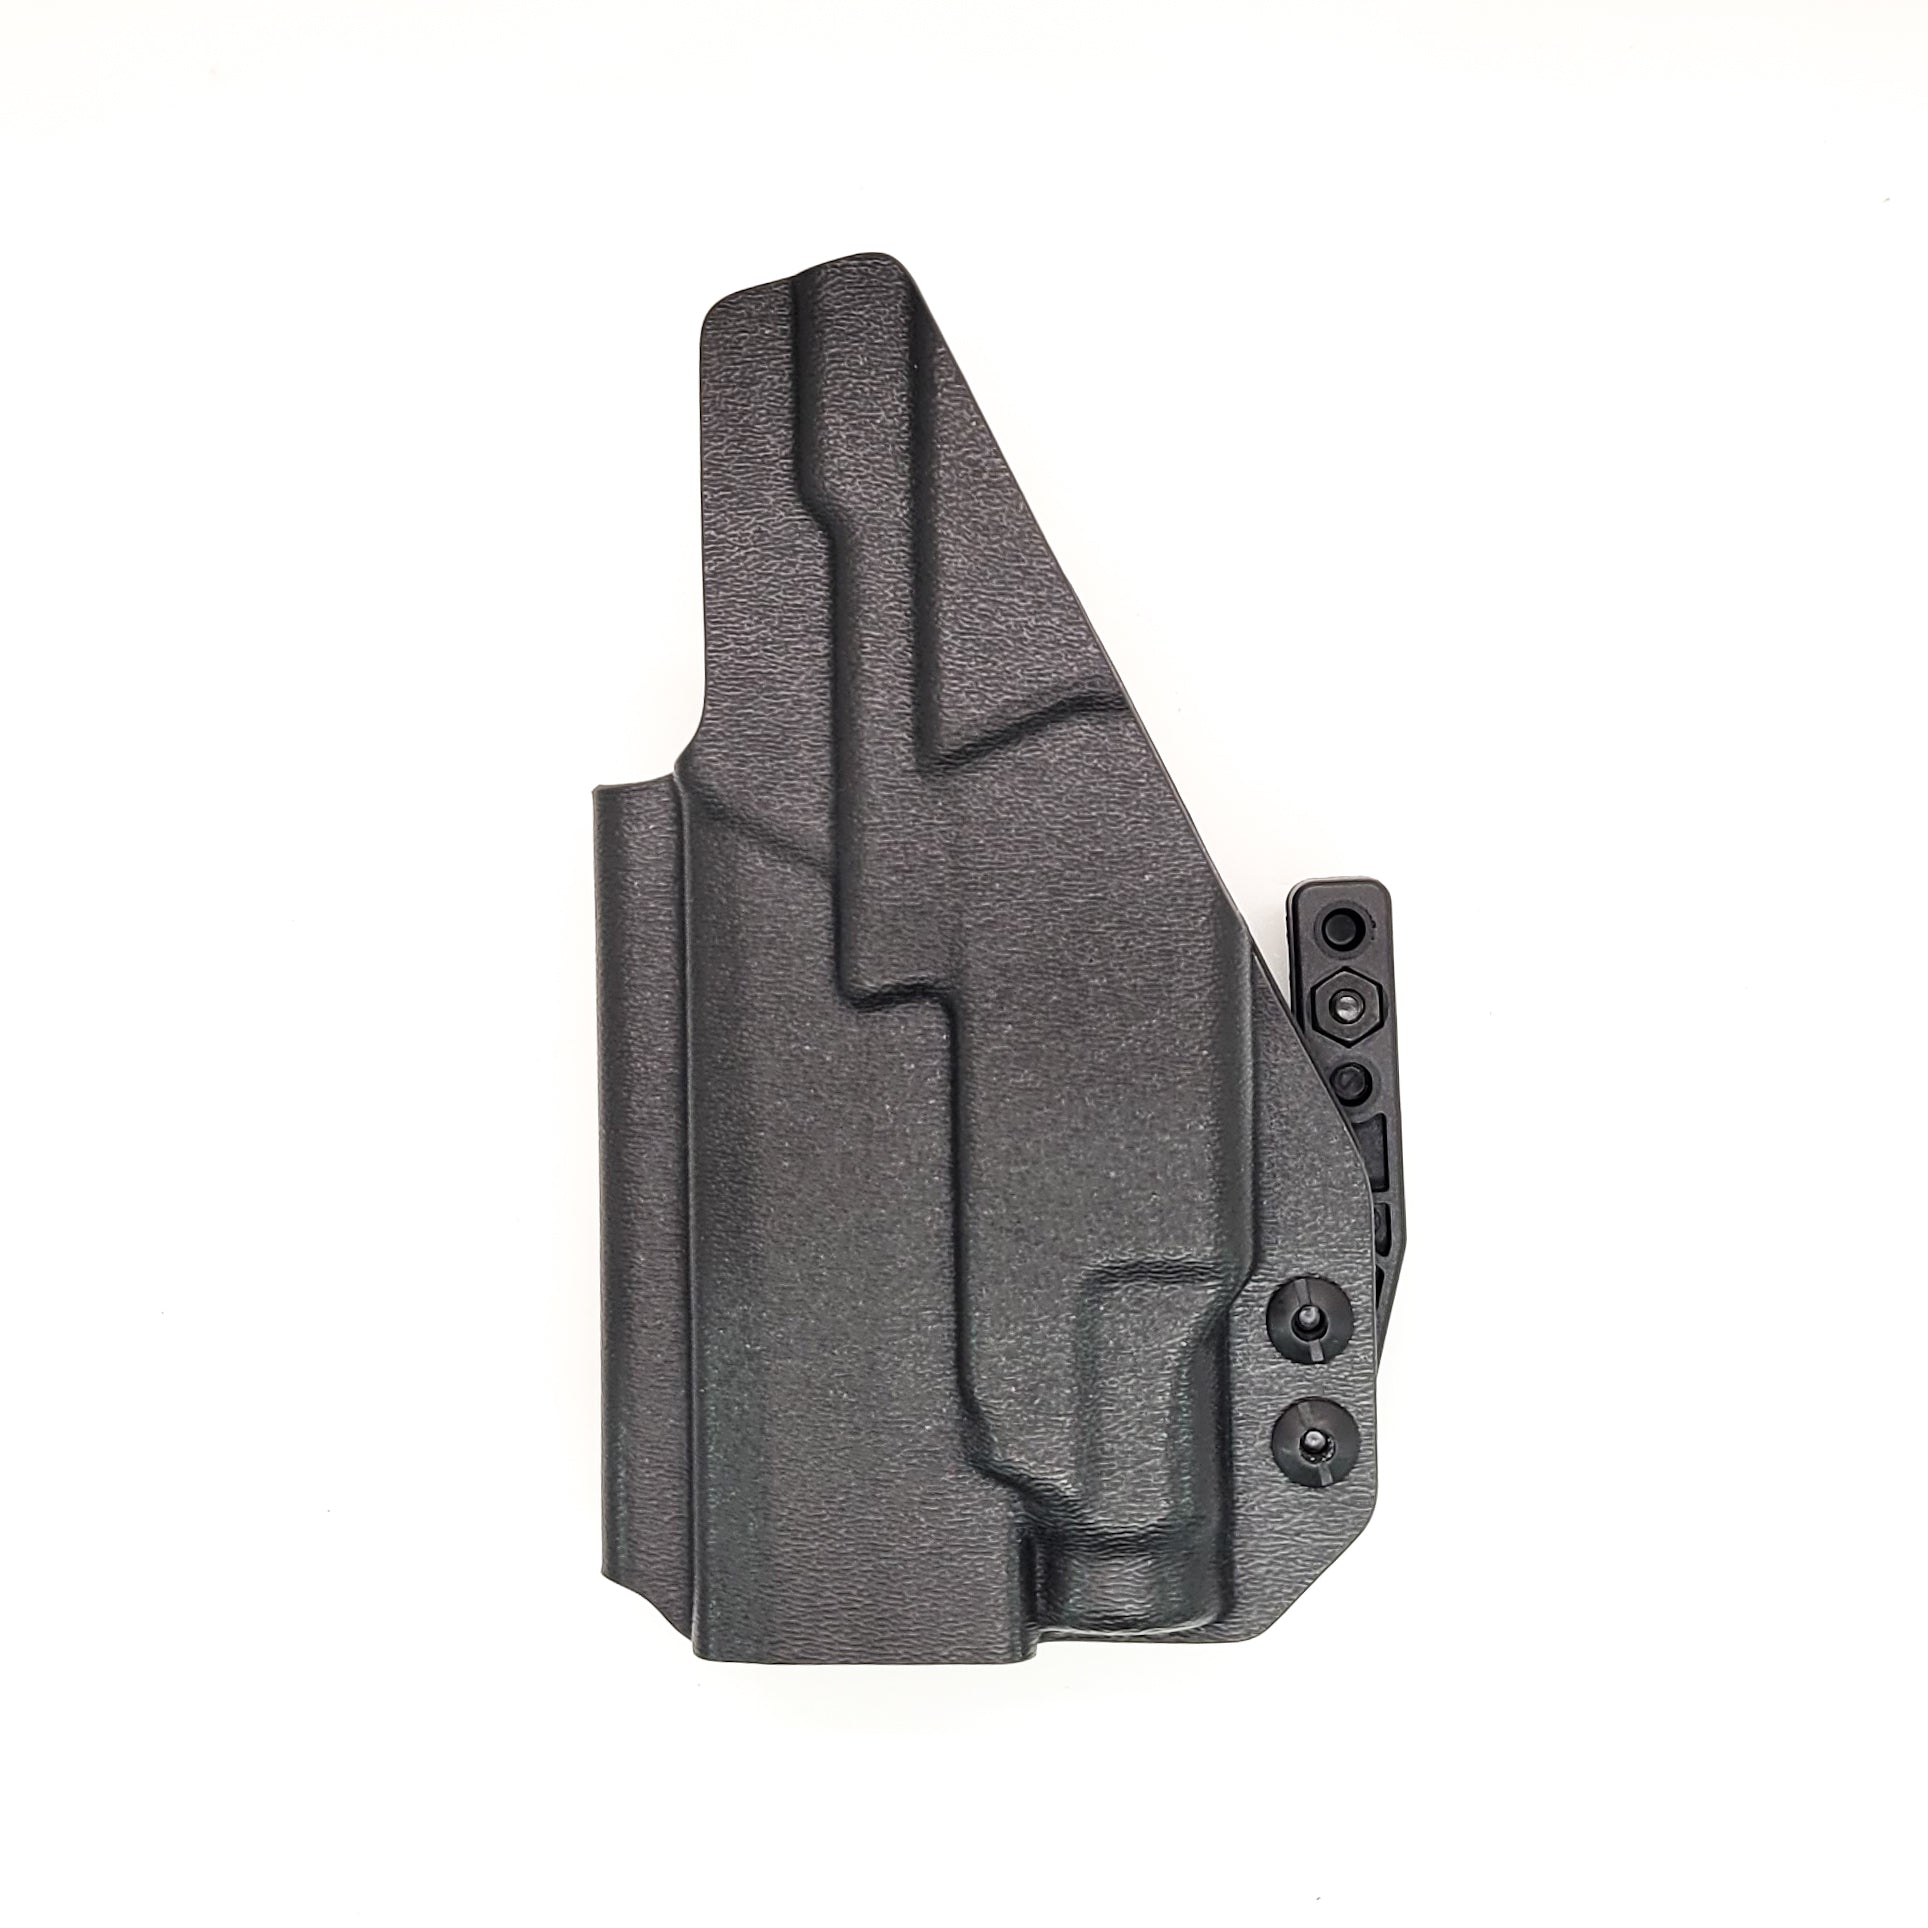 For the best concealed IWB AIWB Inside Waistband Holster designed to fit the Sig Sauer P365-XMACRO, P365, and P365XL with the Mischief Machine Alpha, Omega, & Commander Grip Module and the Streamlight 1913 TLR-7 Sub, shop Four Brothers Holsters. Full sweat guard, Open muzzle, cut for red dot sights. MACRO TLR7 Sub